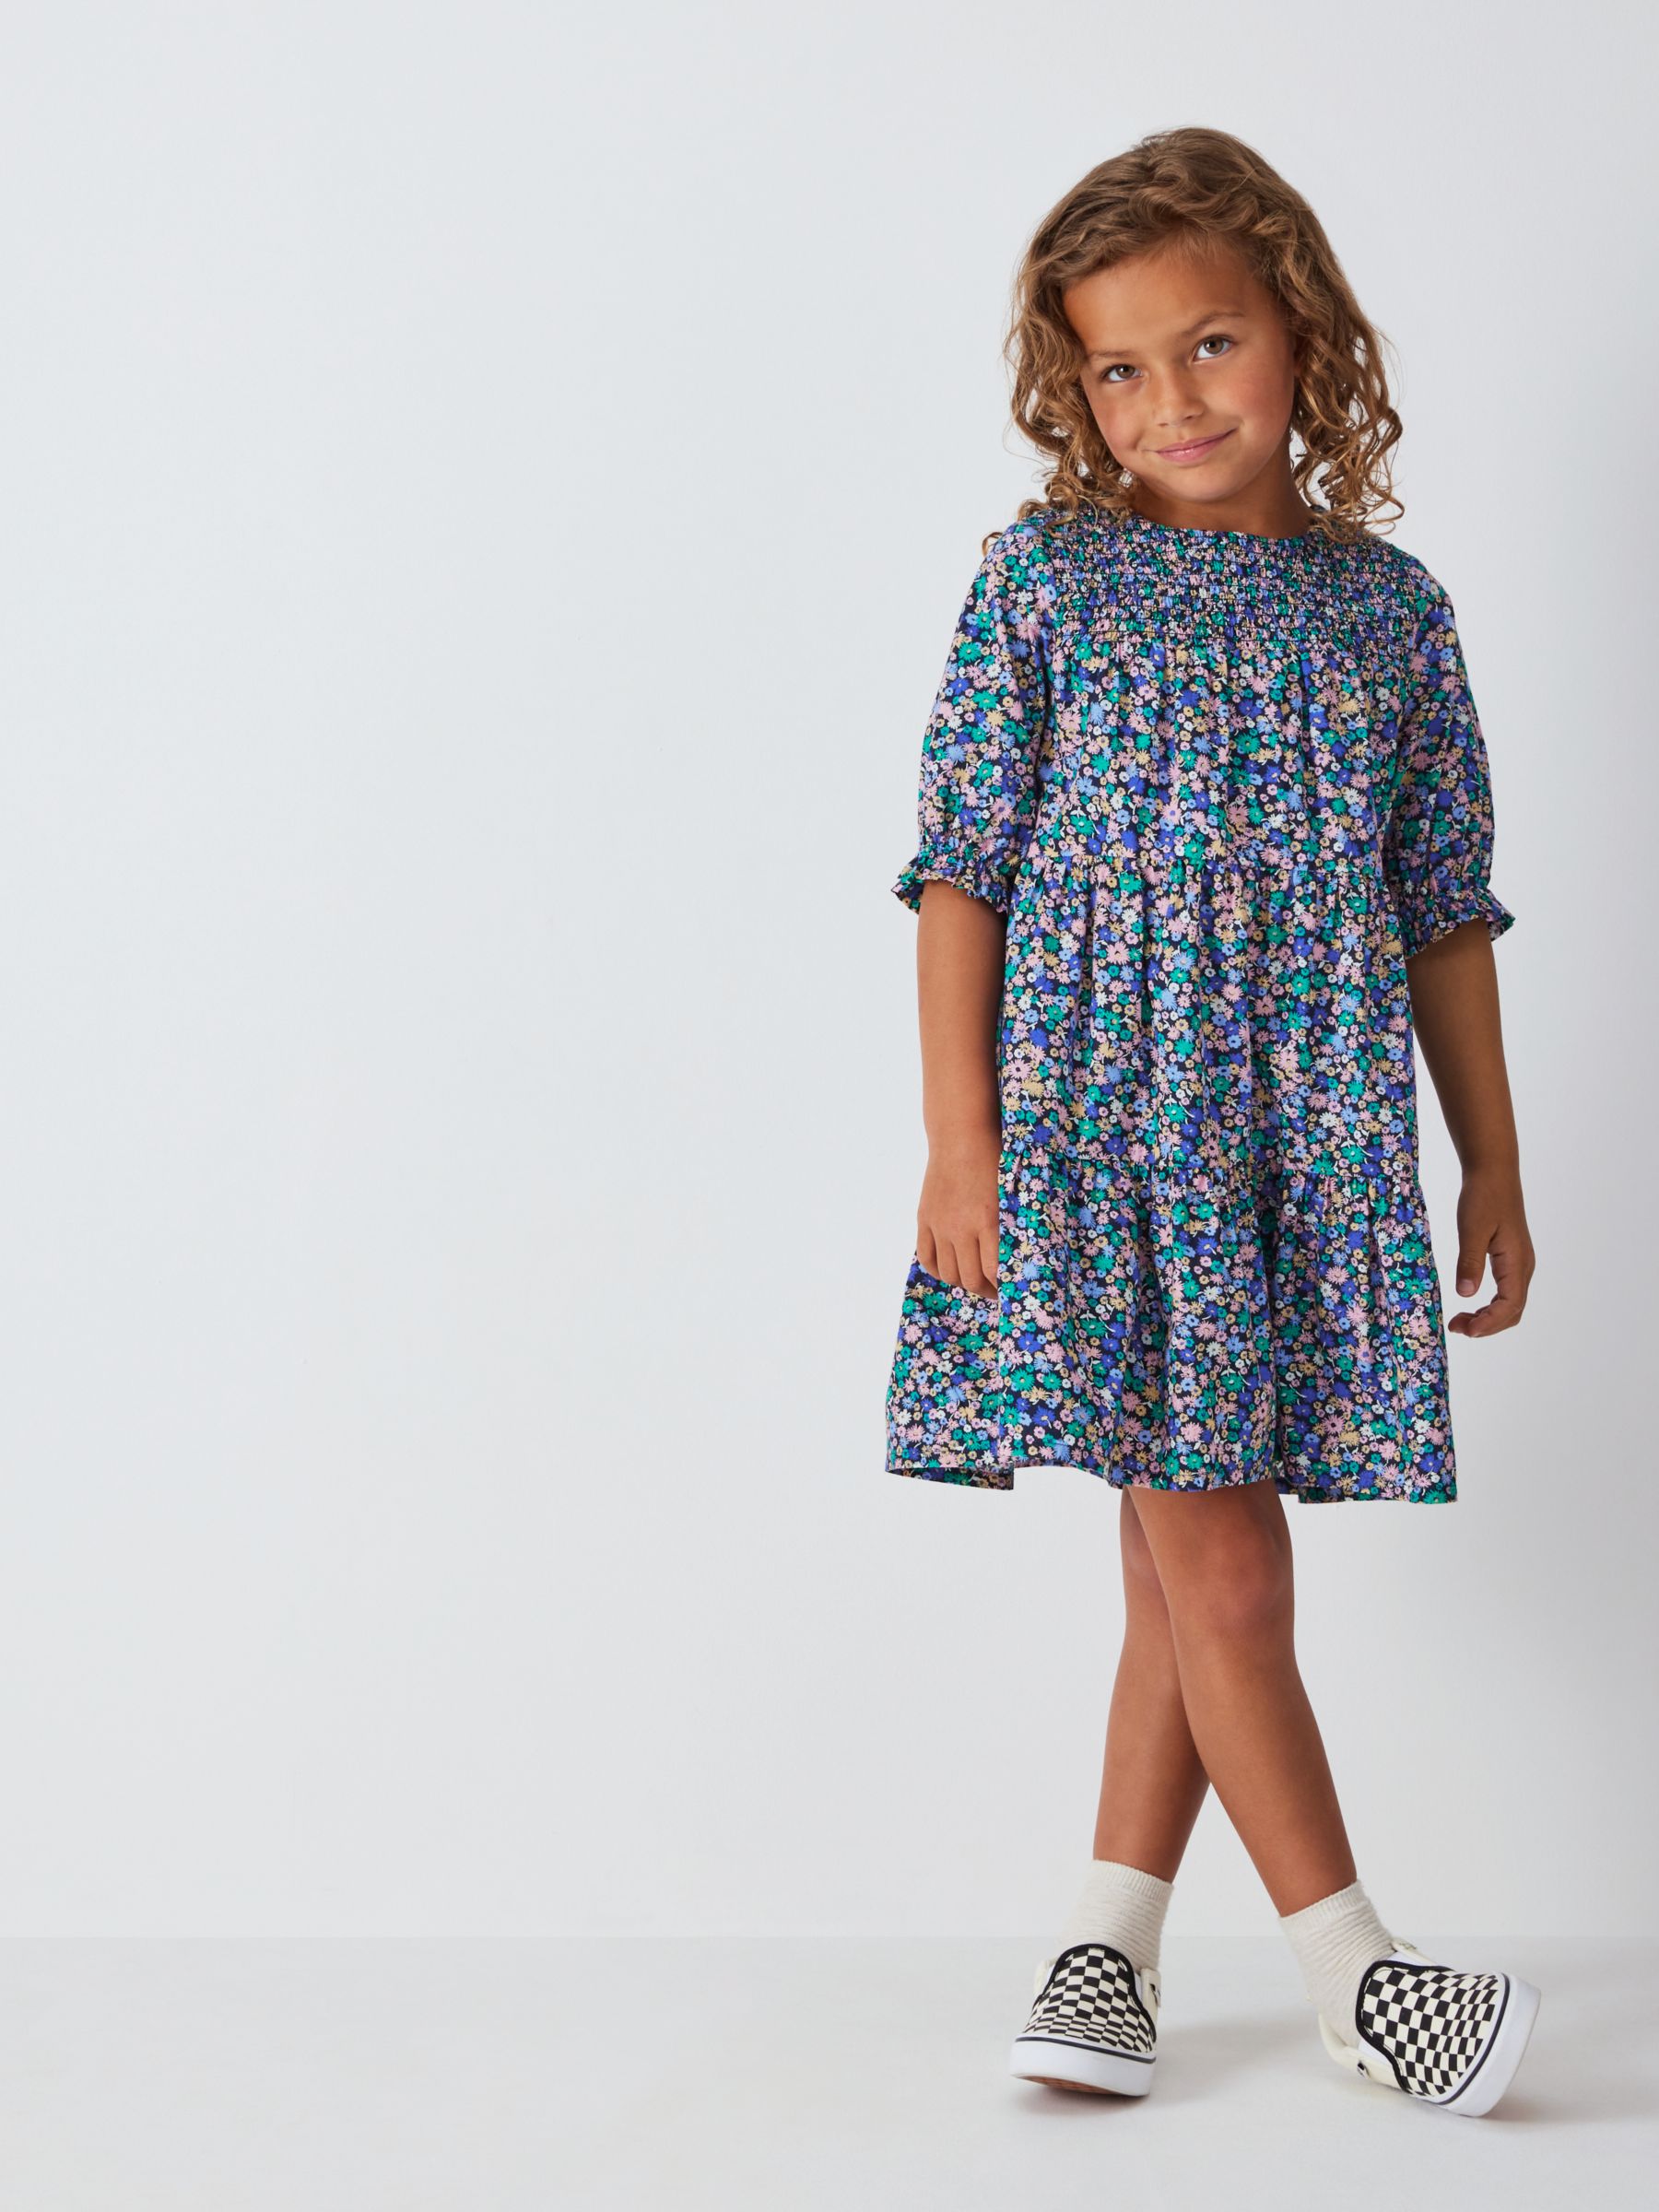 John Lewis Kids' Floral Tiered Dress, Outer Space at John Lewis & Partners